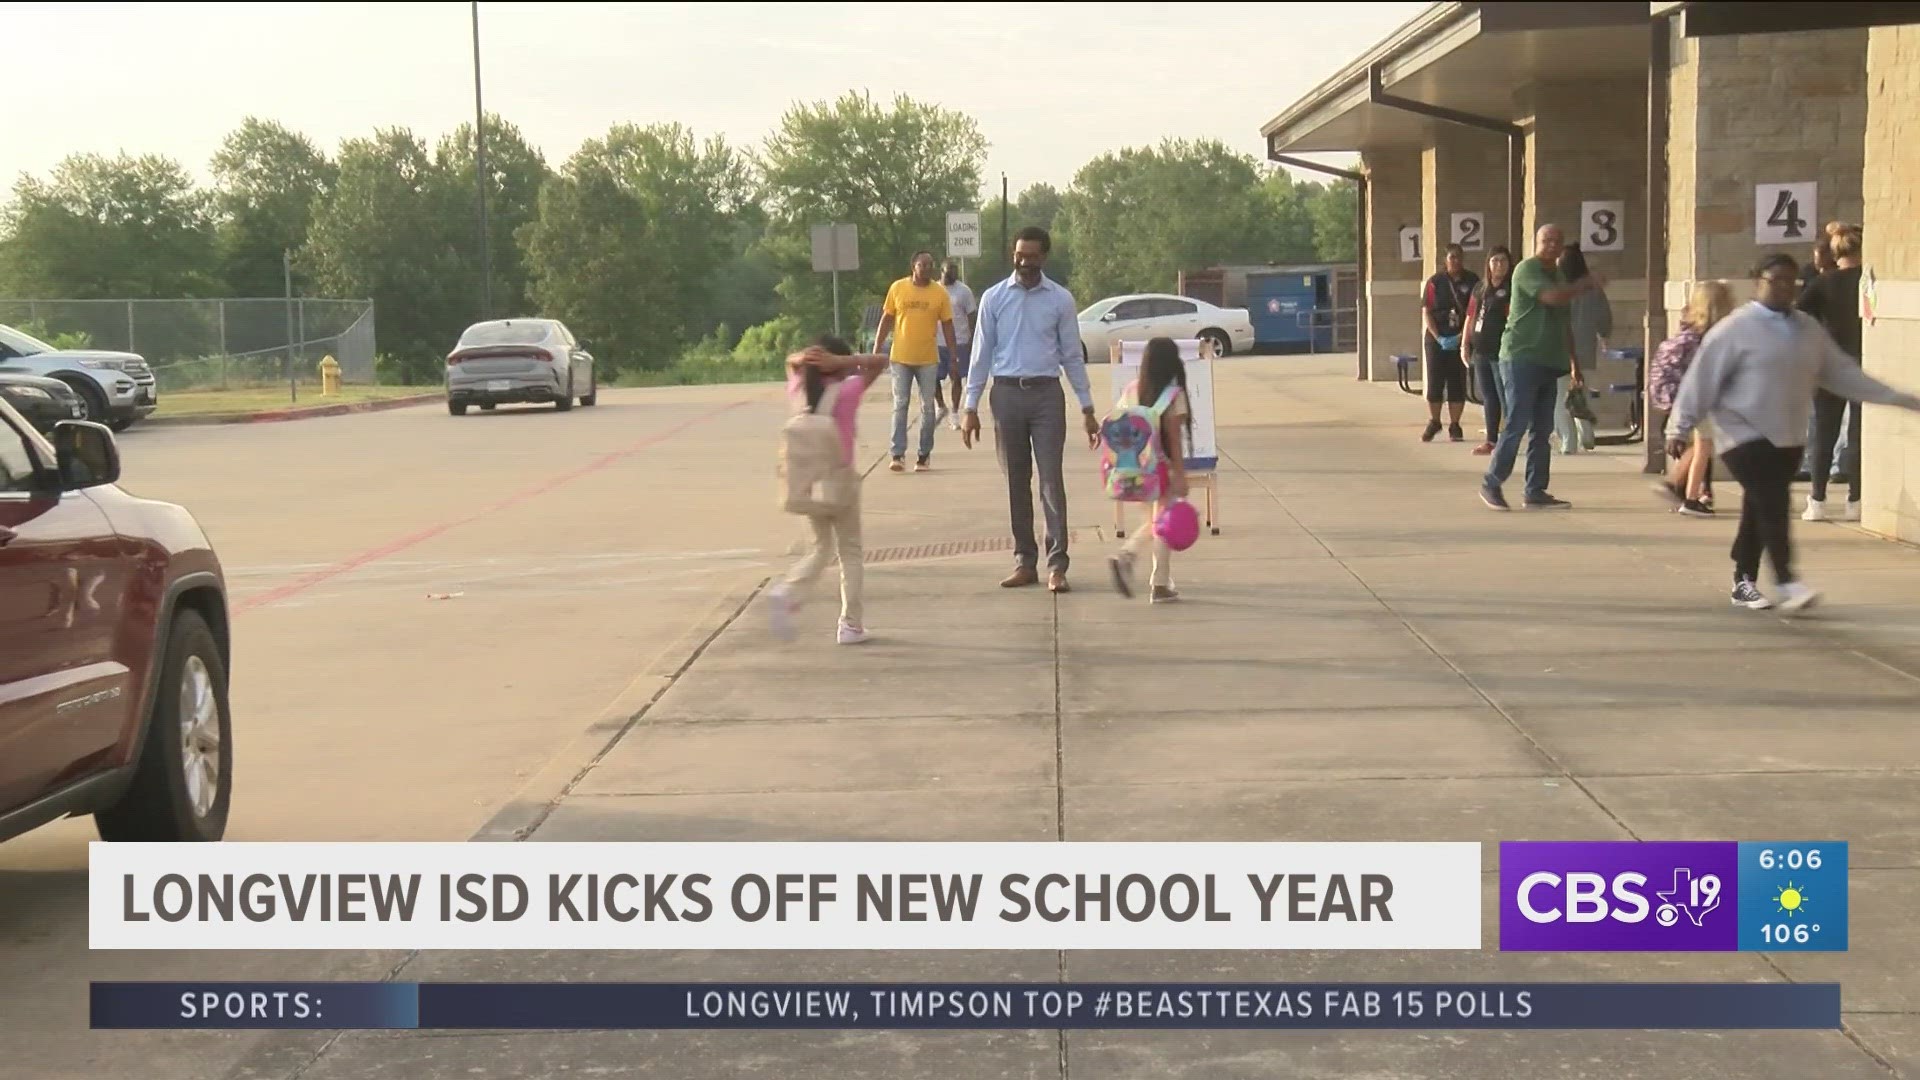 Students were welcomed back with big smiles, hugs, and high-fives across Longview ISD campuses.